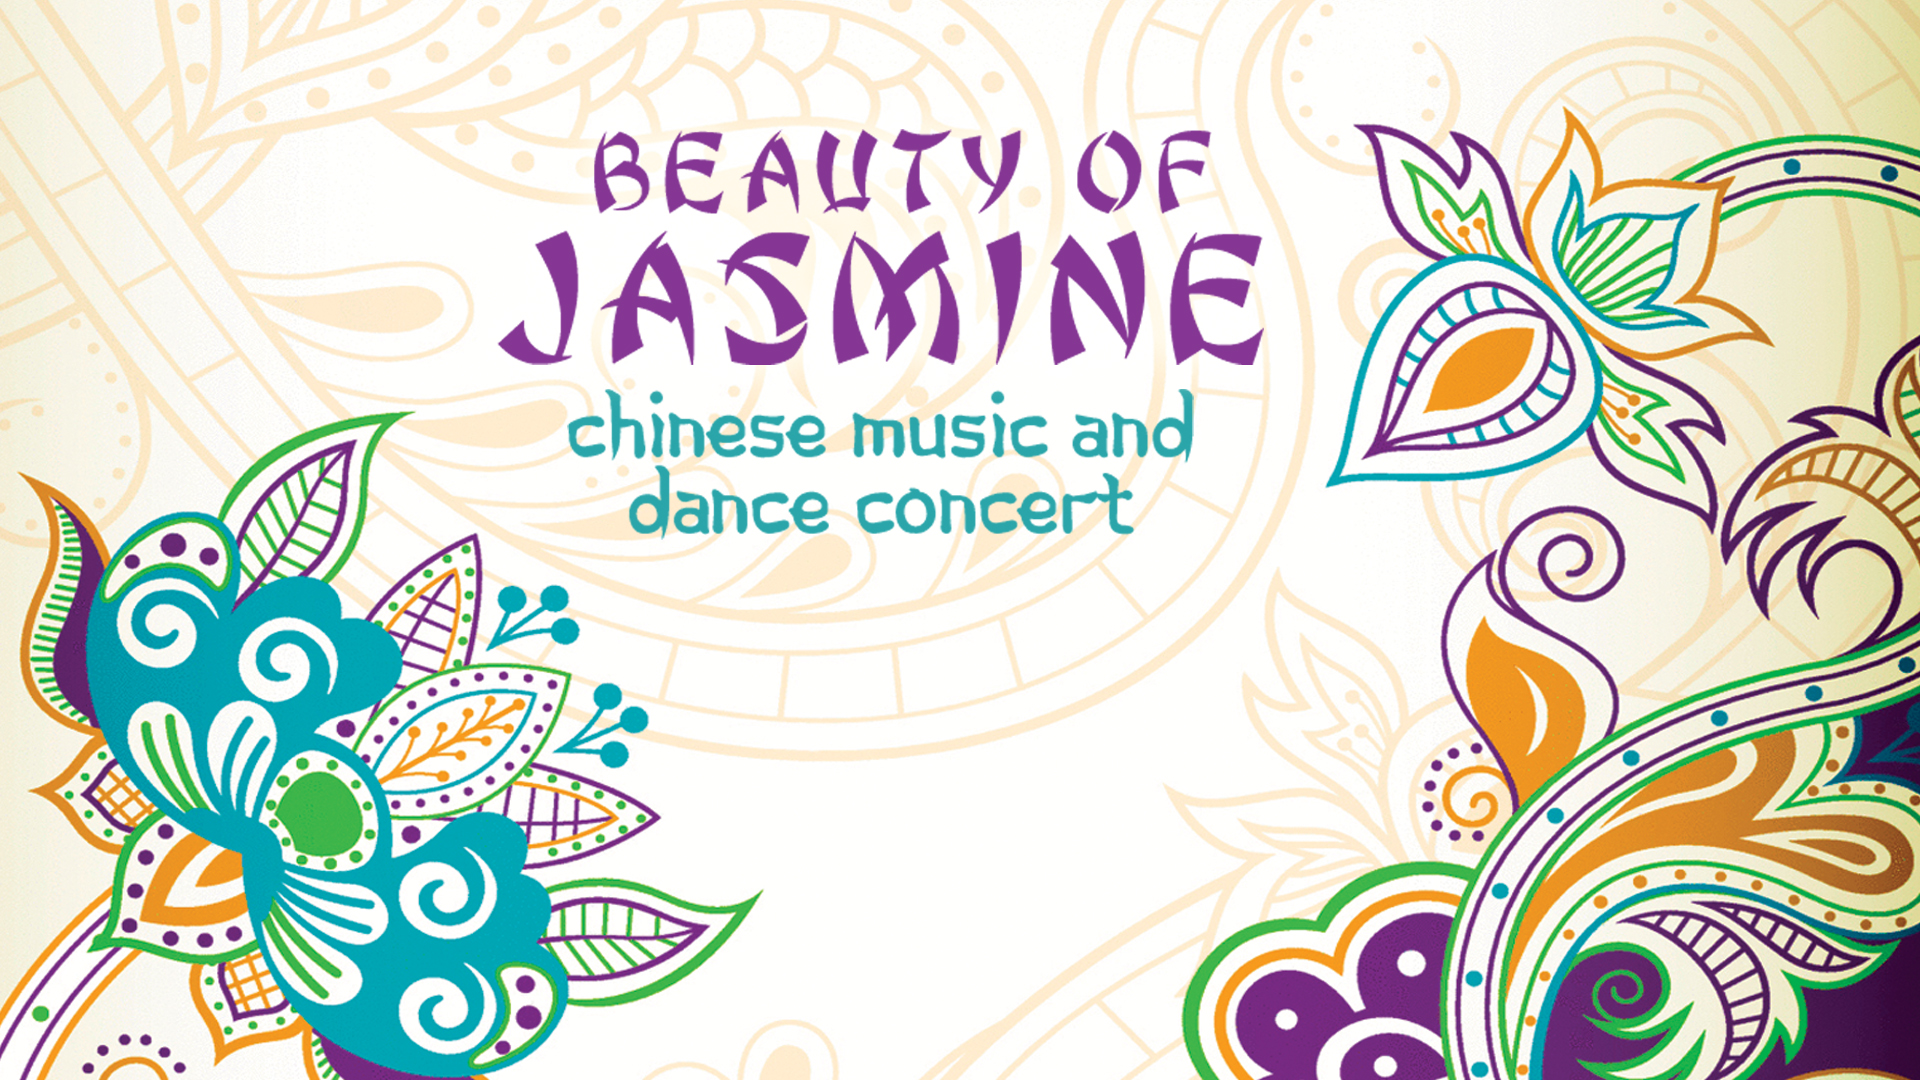 Several drawn flowers around the words "Beauty of Jasmine: Chinese music and dance concert".